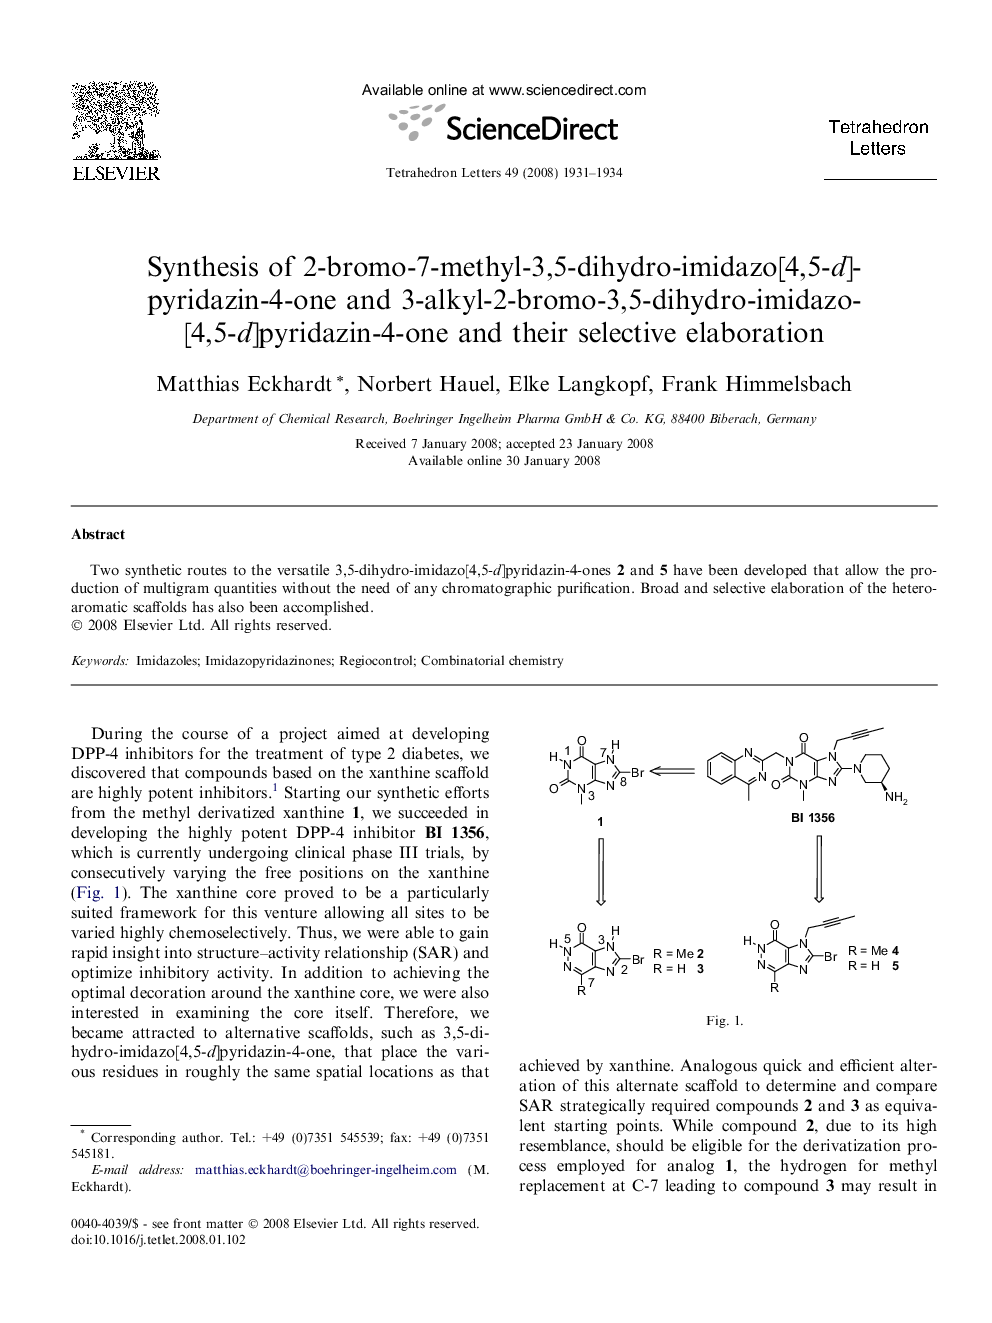 Synthesis of 2-bromo-7-methyl-3,5-dihydro-imidazo[4,5-d]pyridazin-4-one and 3-alkyl-2-bromo-3,5-dihydro-imidazo[4,5-d]pyridazin-4-one and their selective elaboration